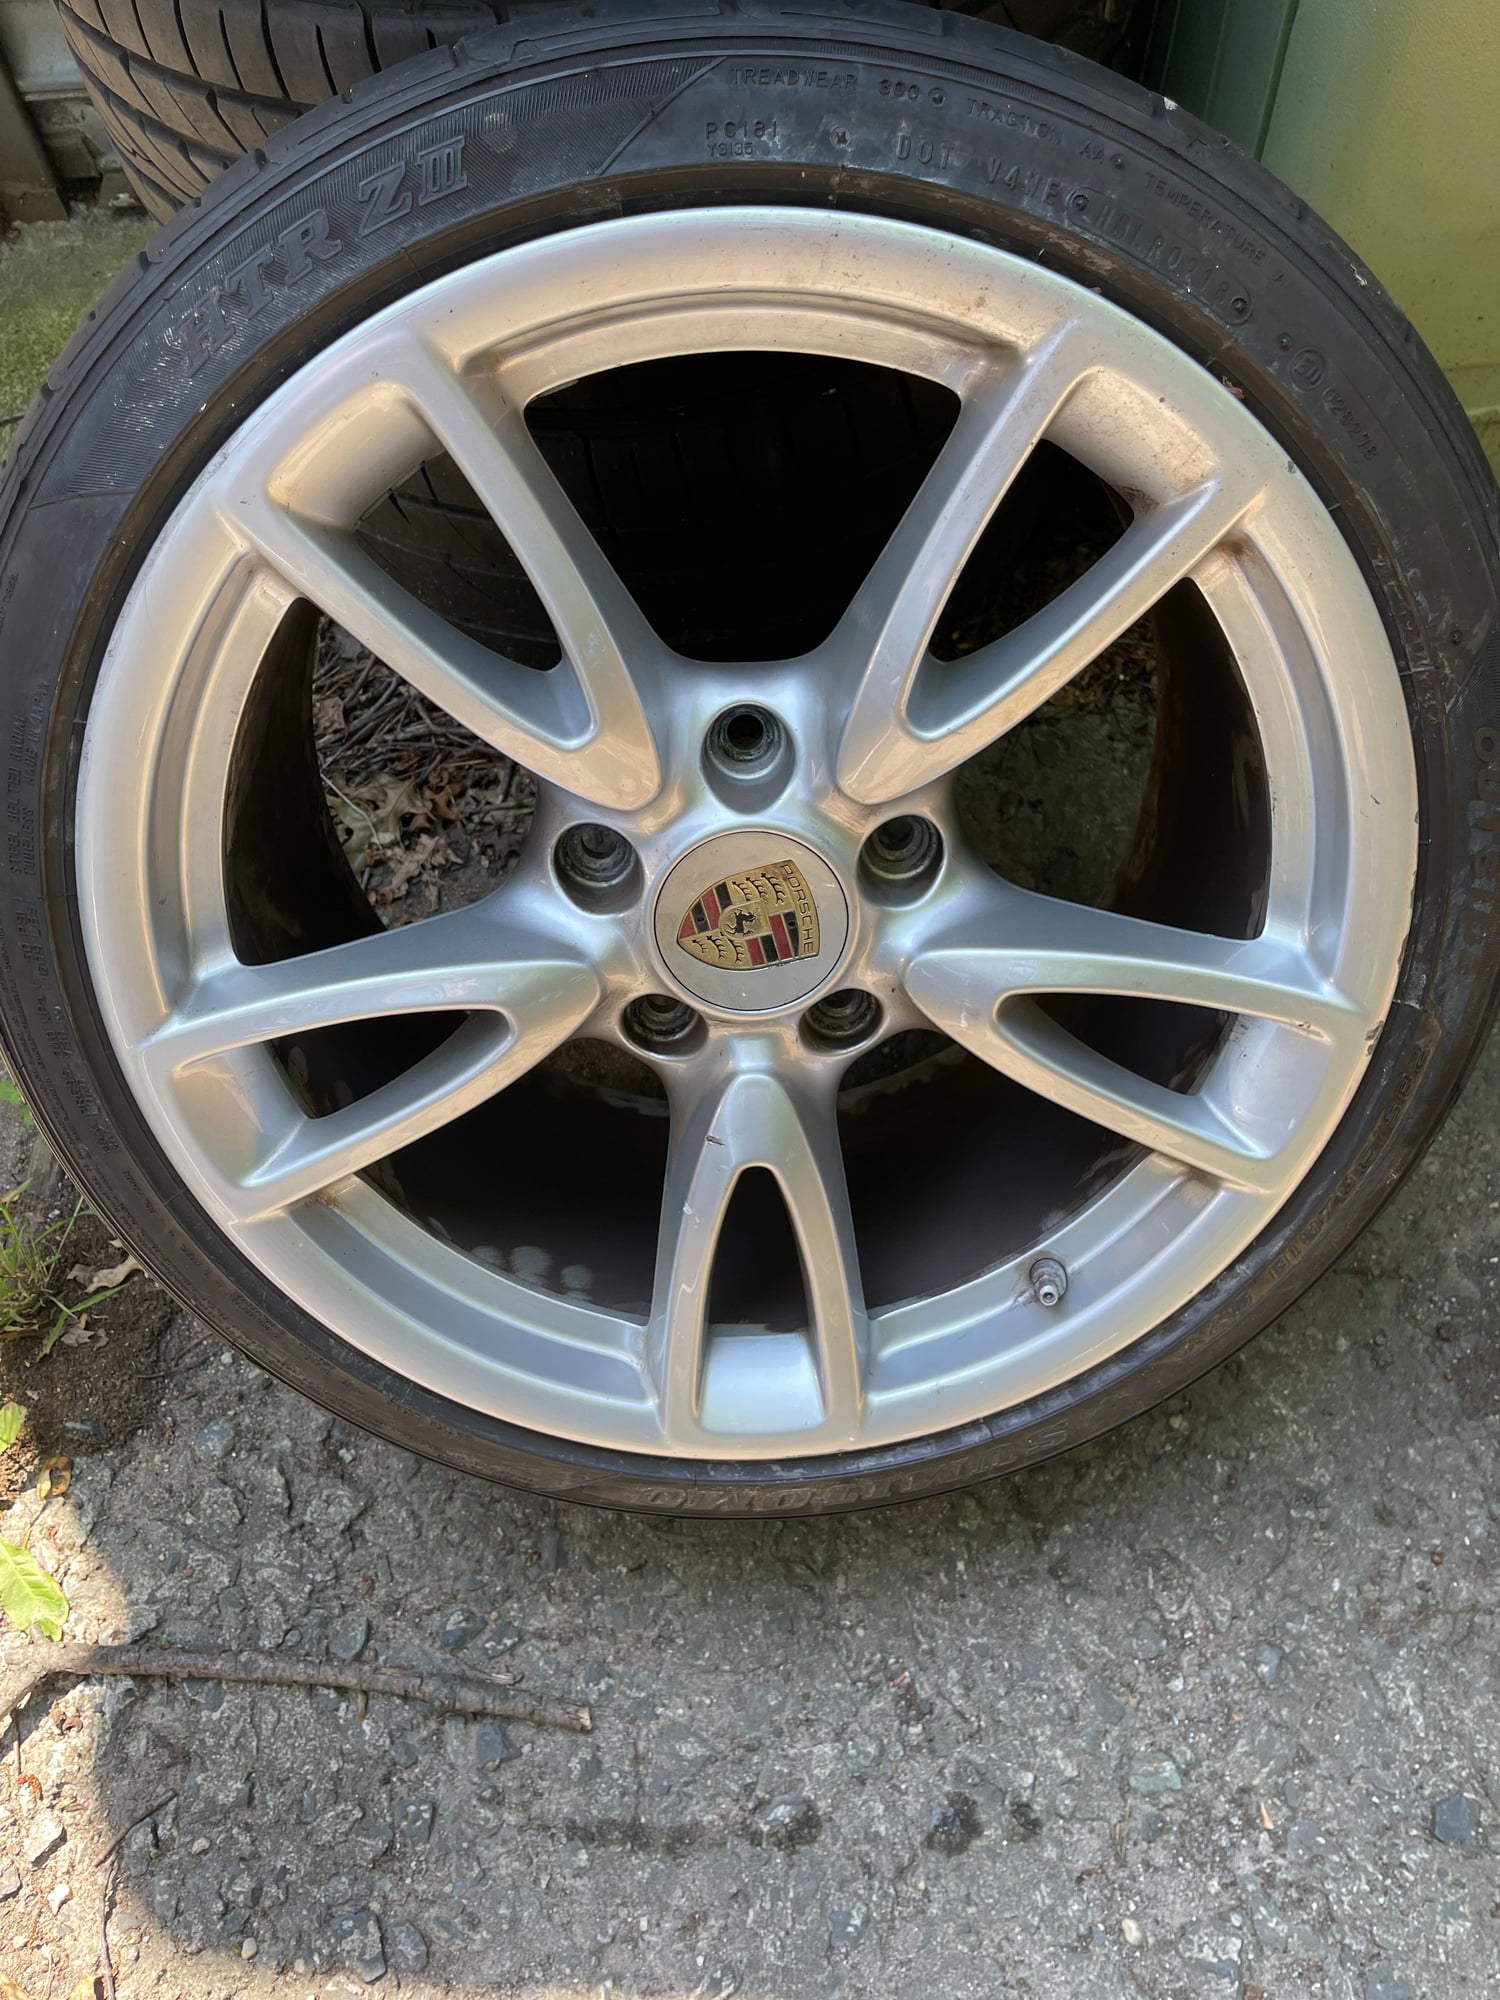 Wheels and Tires/Axles - Porsche 911 rims for sale 18  with decent rubber - Used - 1999 to 2019 Porsche 911 - Staten Island, NY 10305, United States